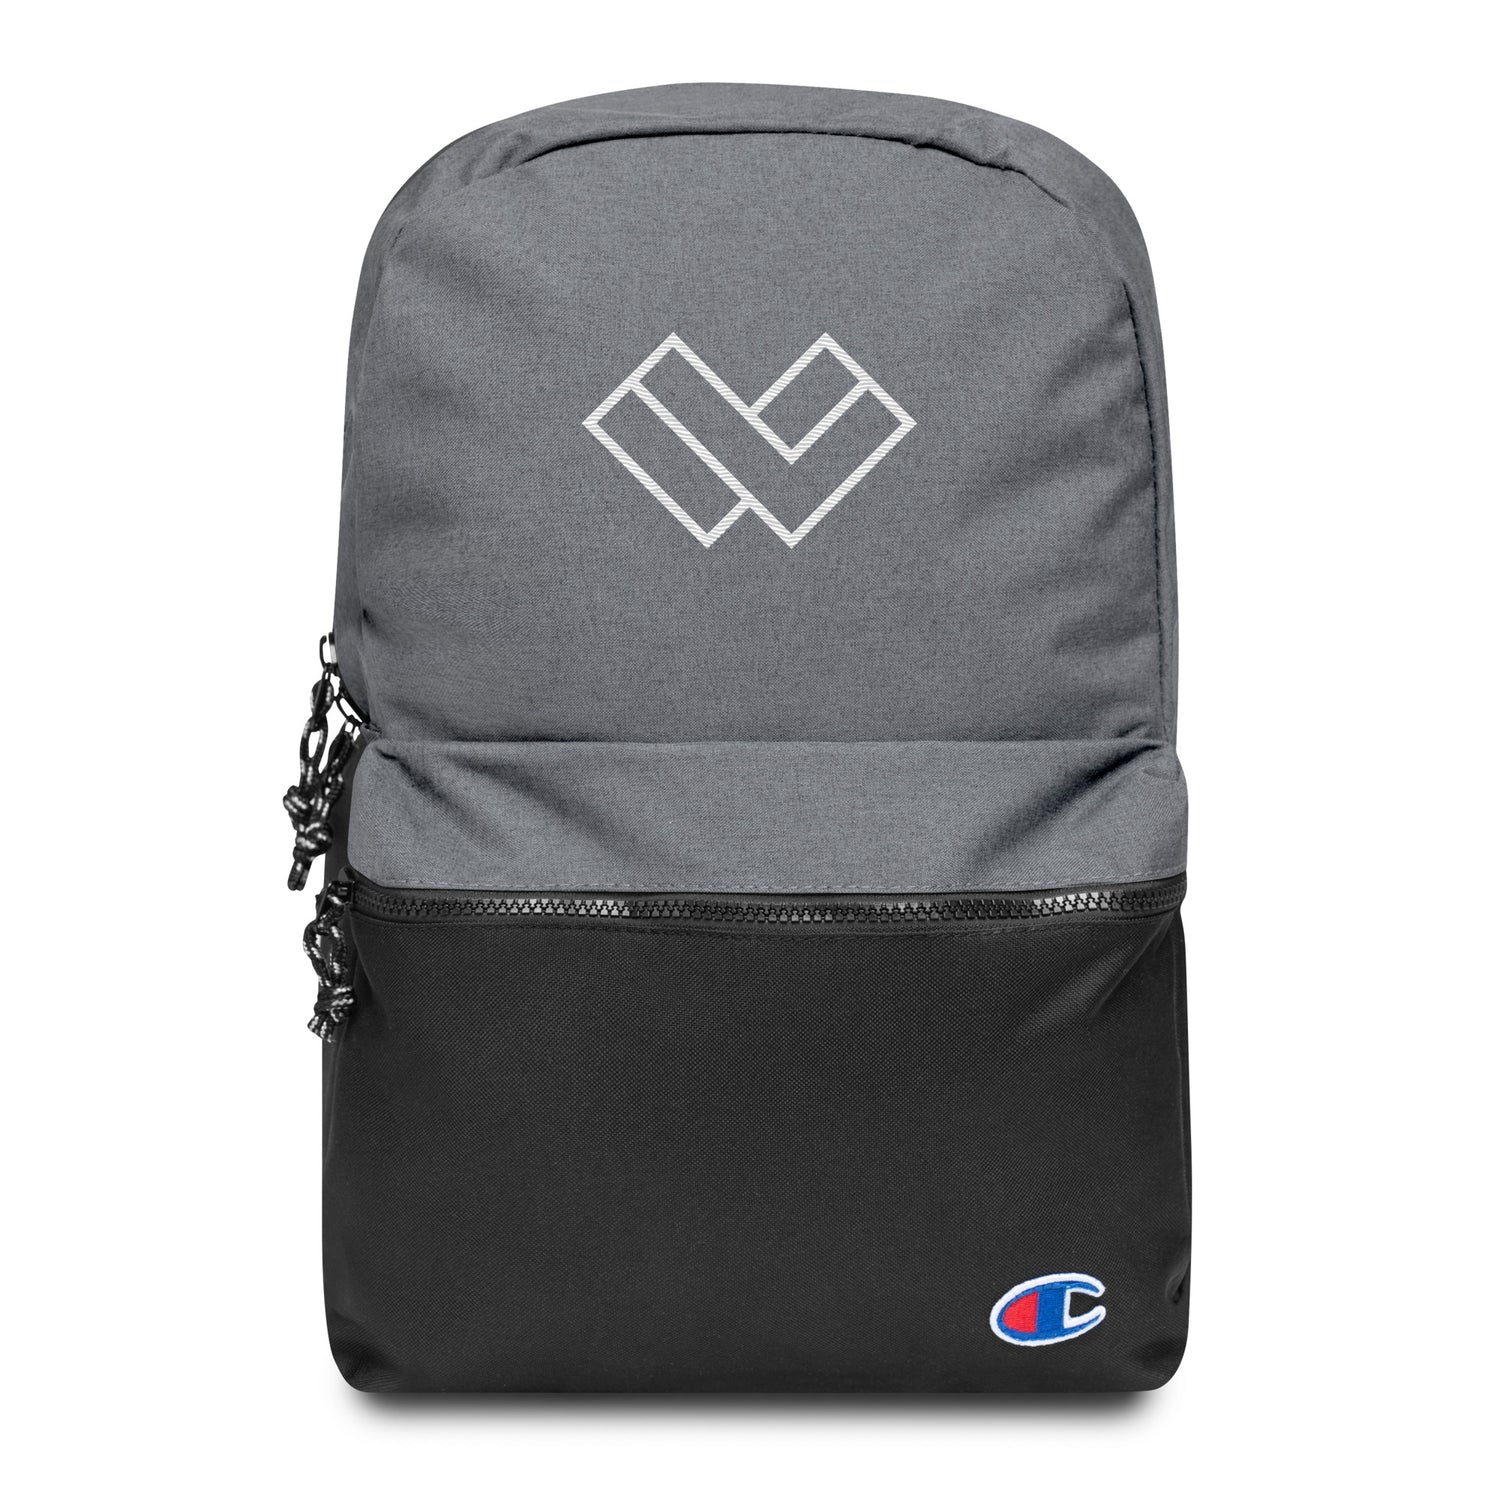 Cradle Lacrosse Backpack by Champion Grey Black Front